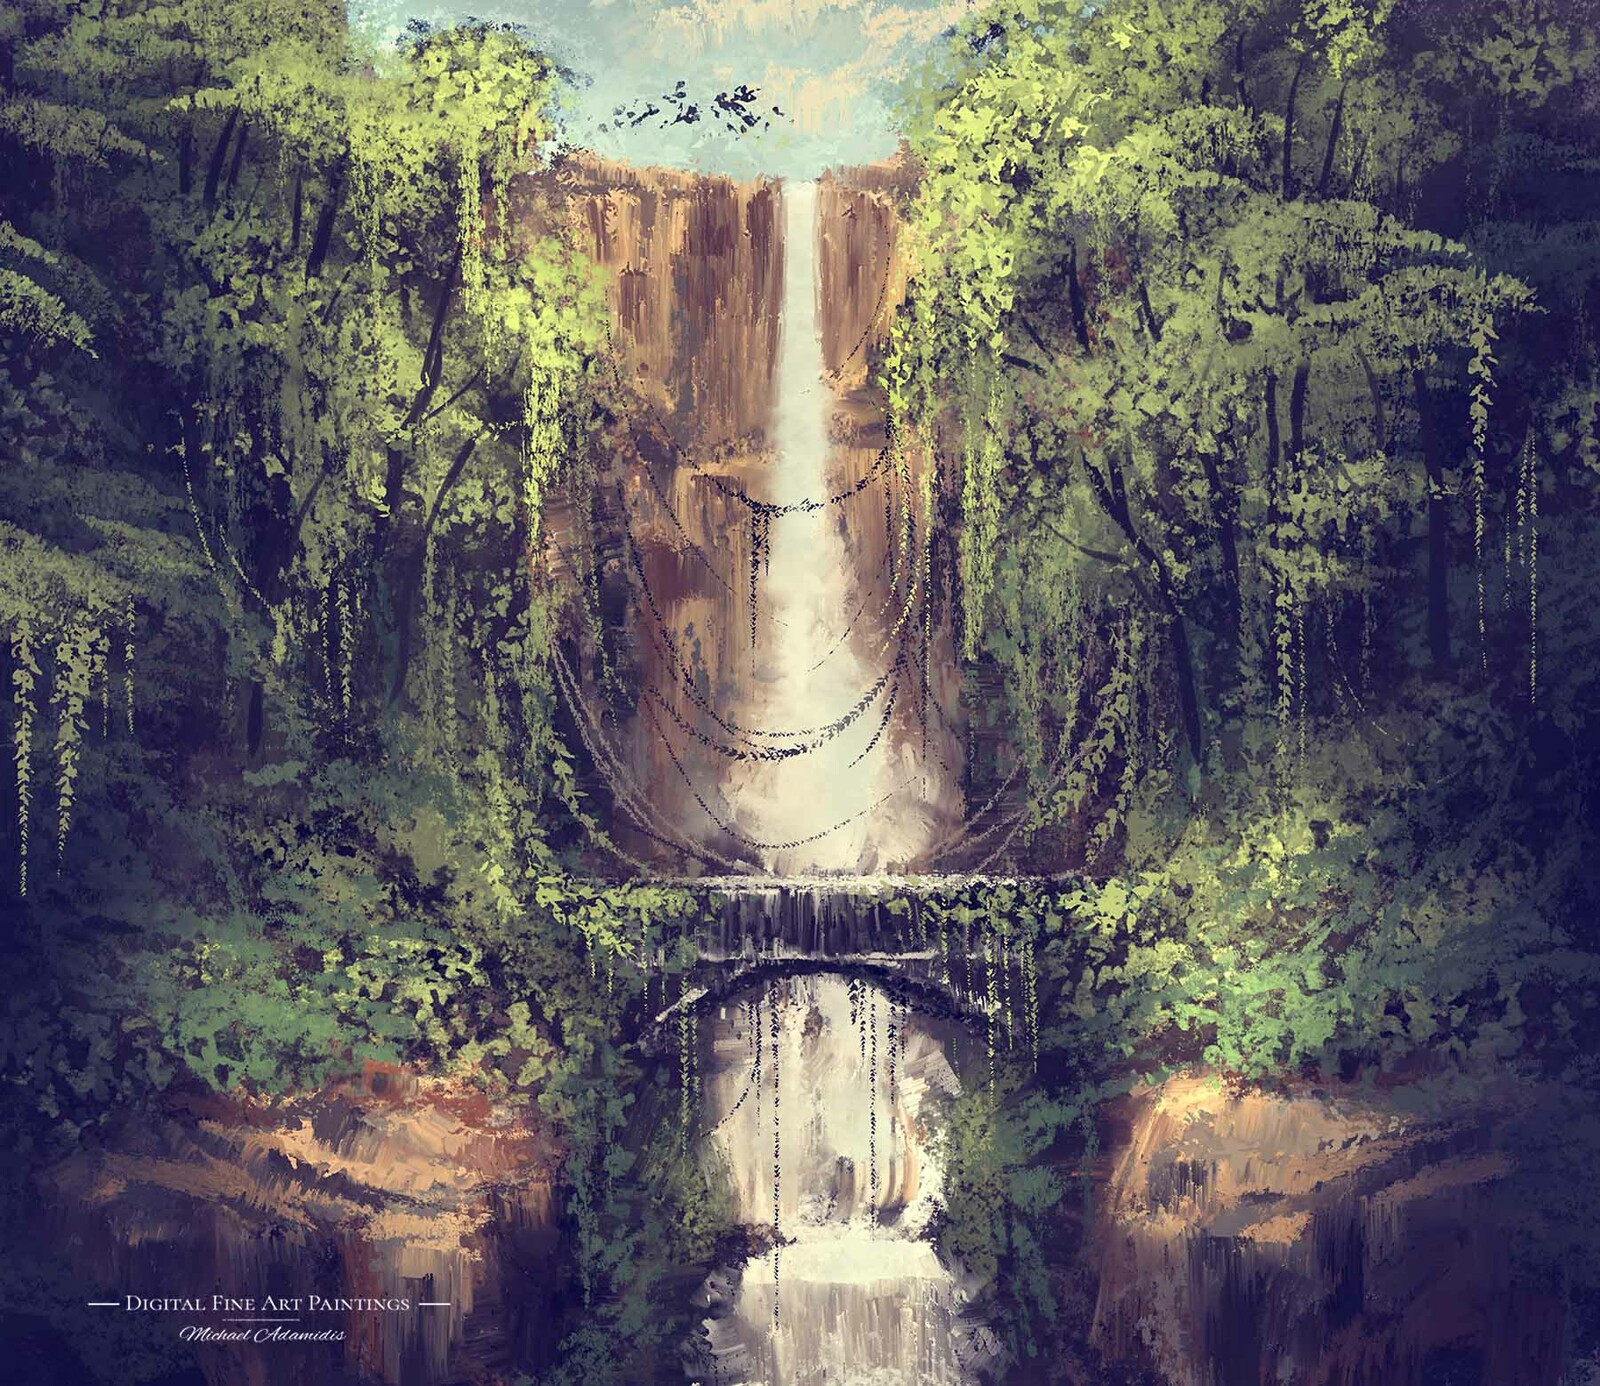 Falling Waters - Landscape / Scenery Artwork with Process Animation